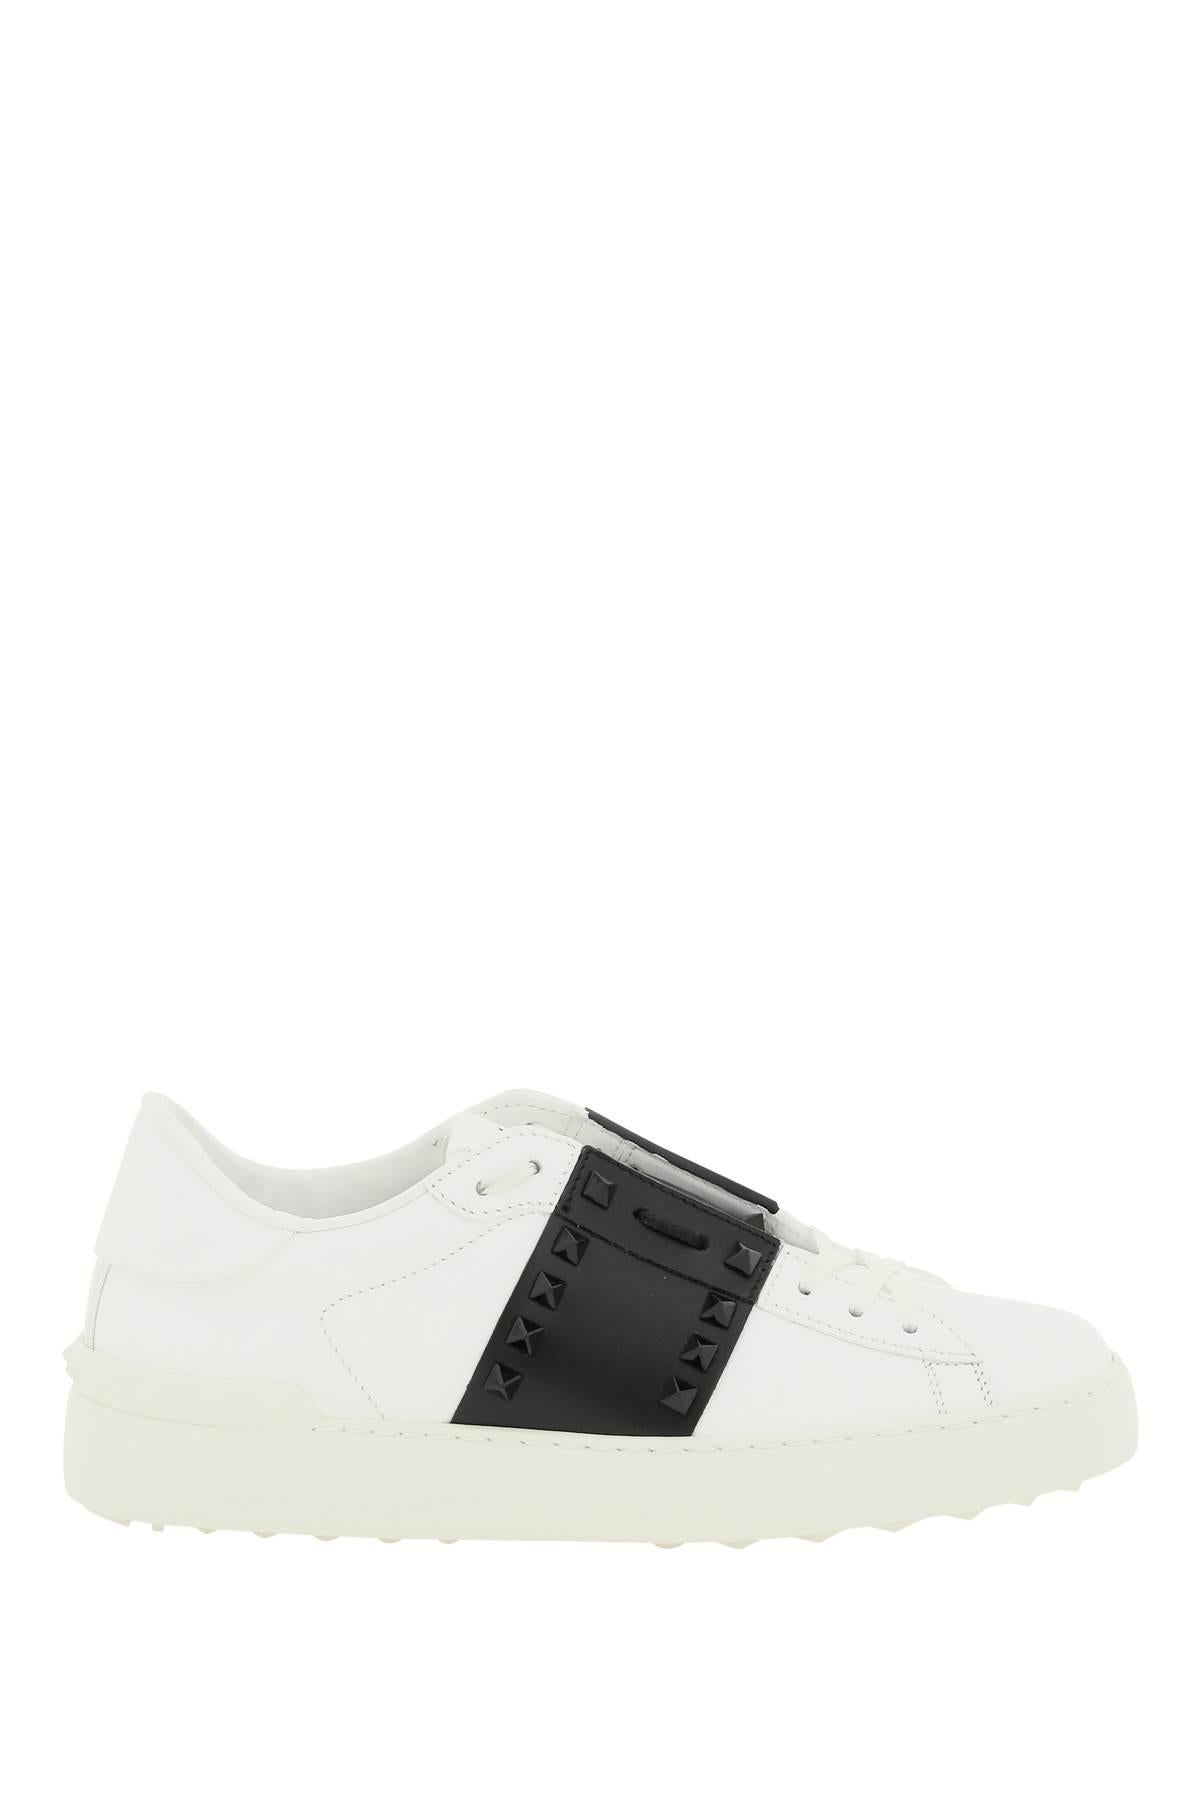 puls Jobtilbud Rodet Women's VALENTINO Sneakers Sale, Up To 70% Off | ModeSens